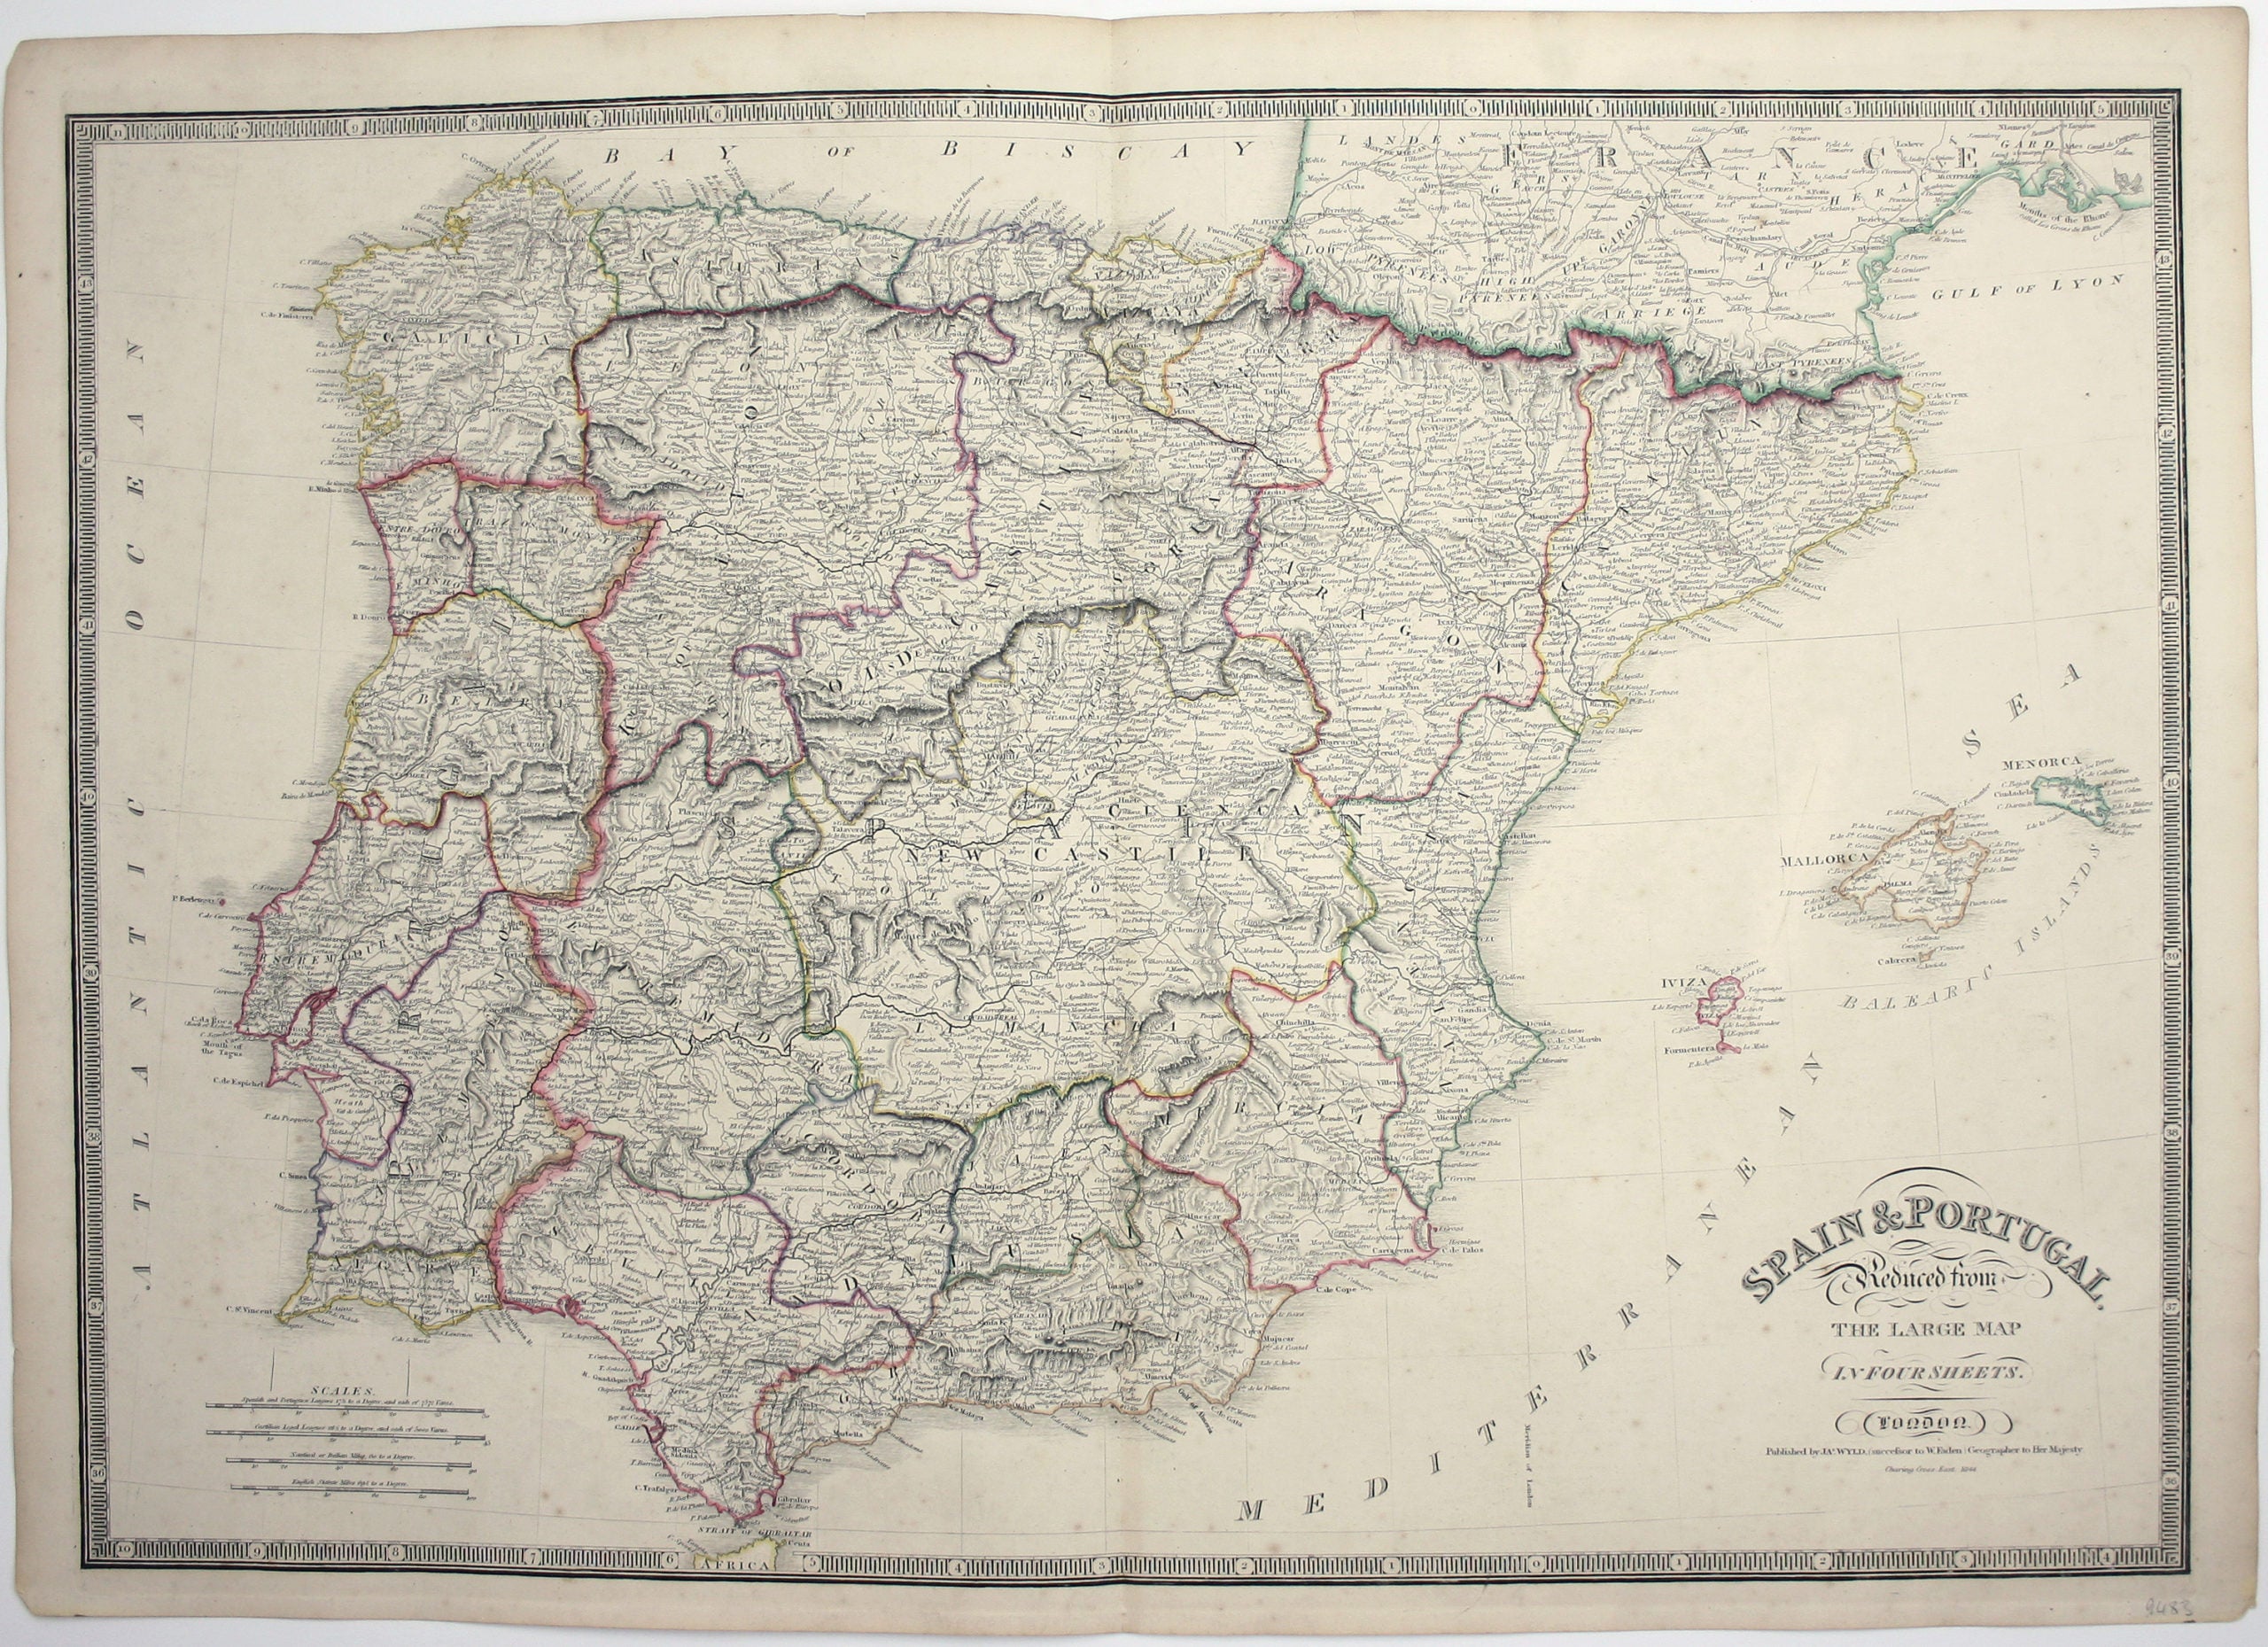 Wyld’s Map of Spain & Portugal